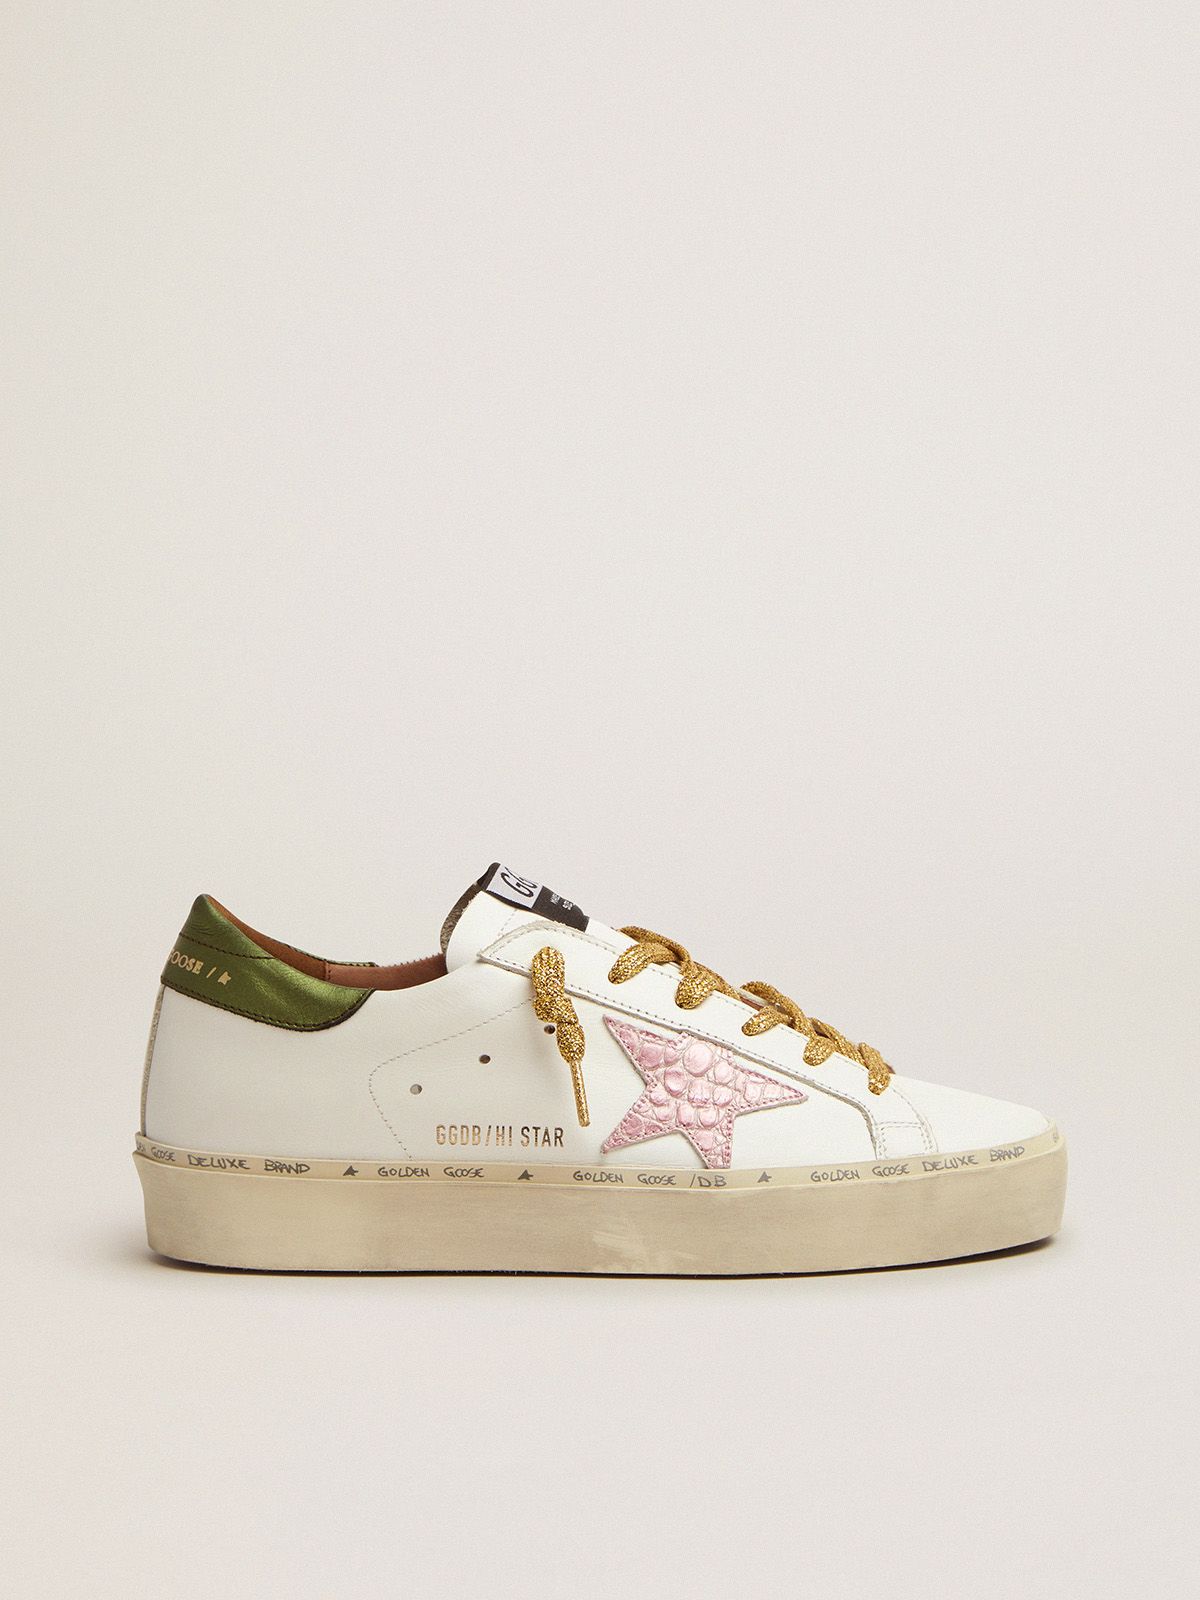 golden goose with and heel leather sneakers pink Hi crocodile-print star tab Star laminated green